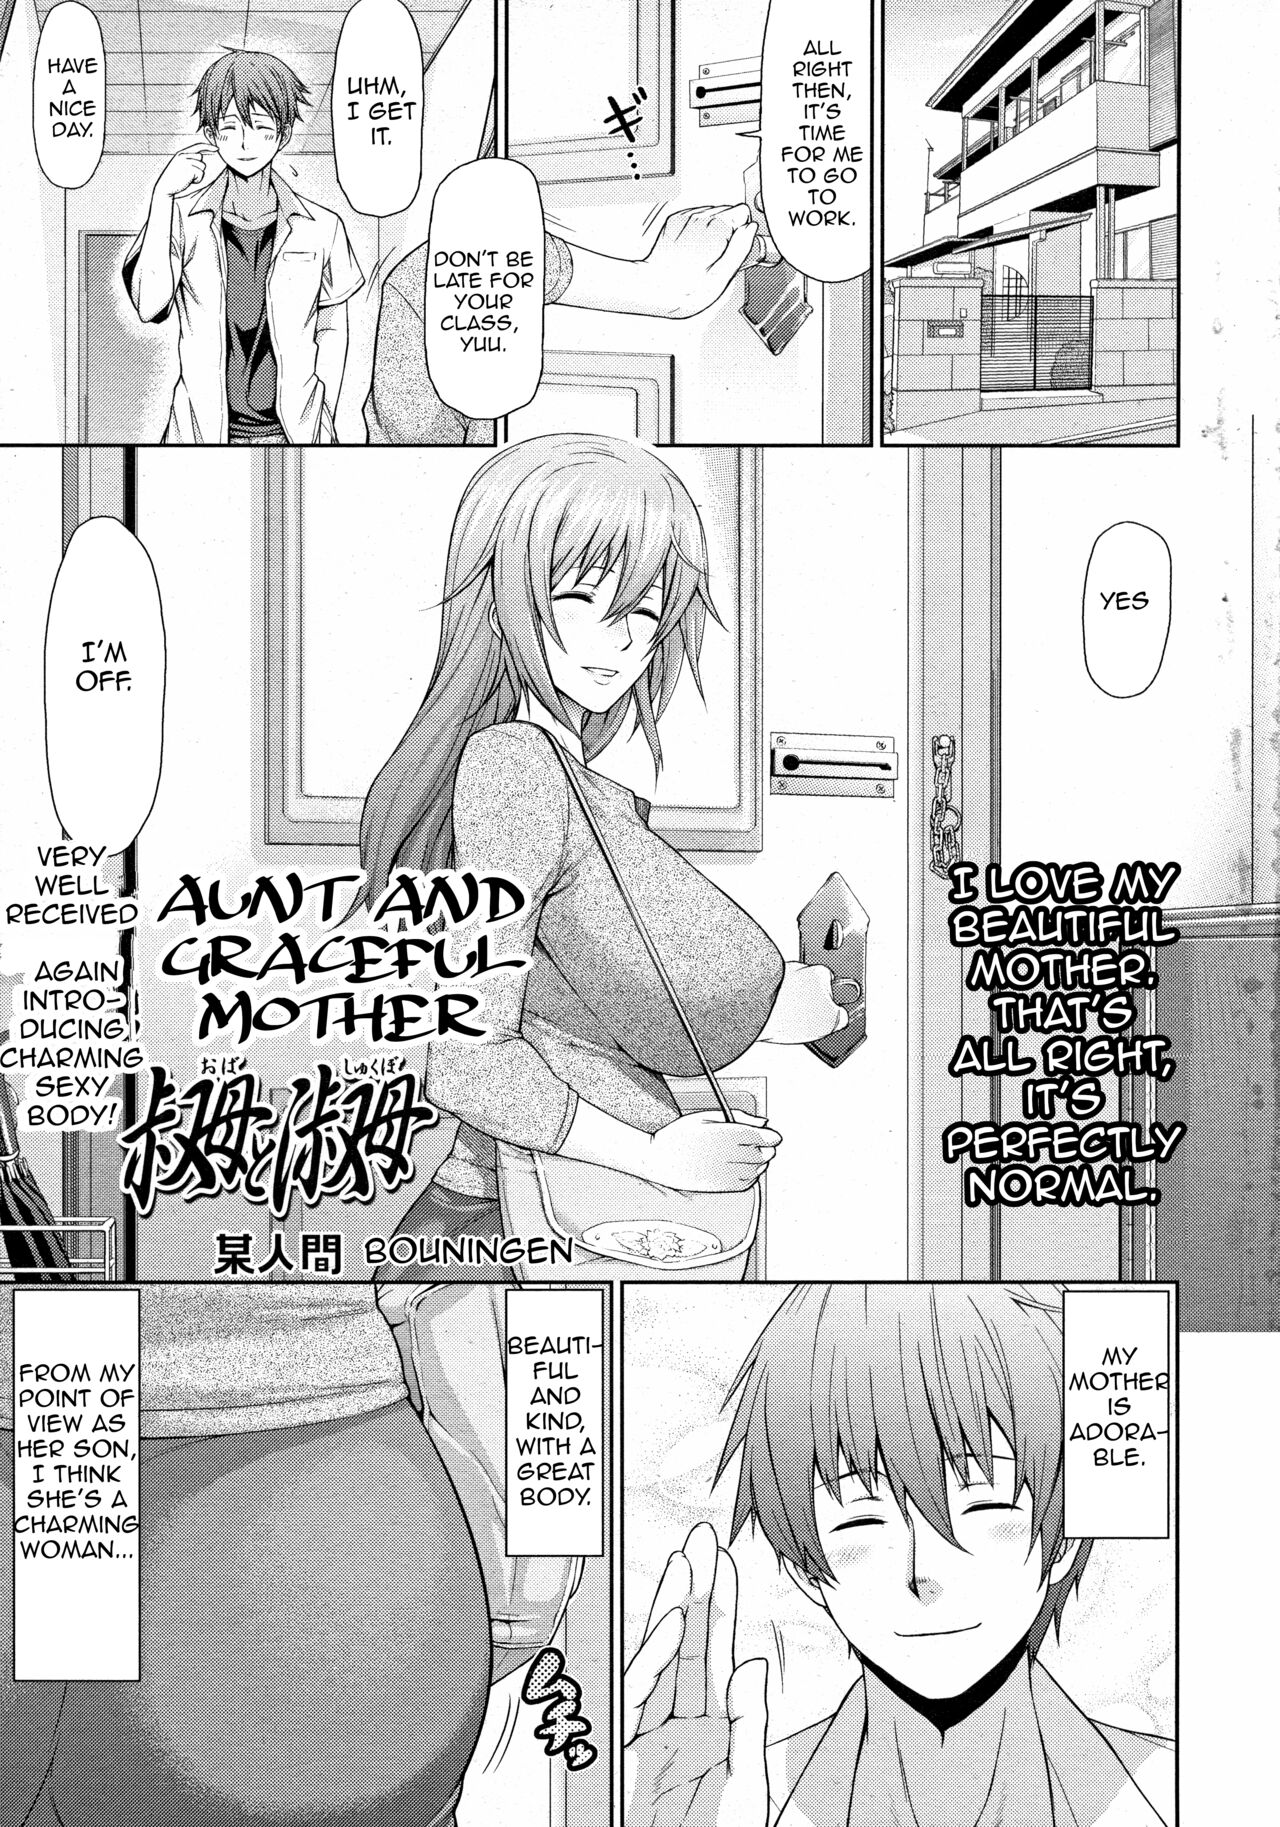 Hentai Manga Comic-Aunt and Graceful Mother-Read-1